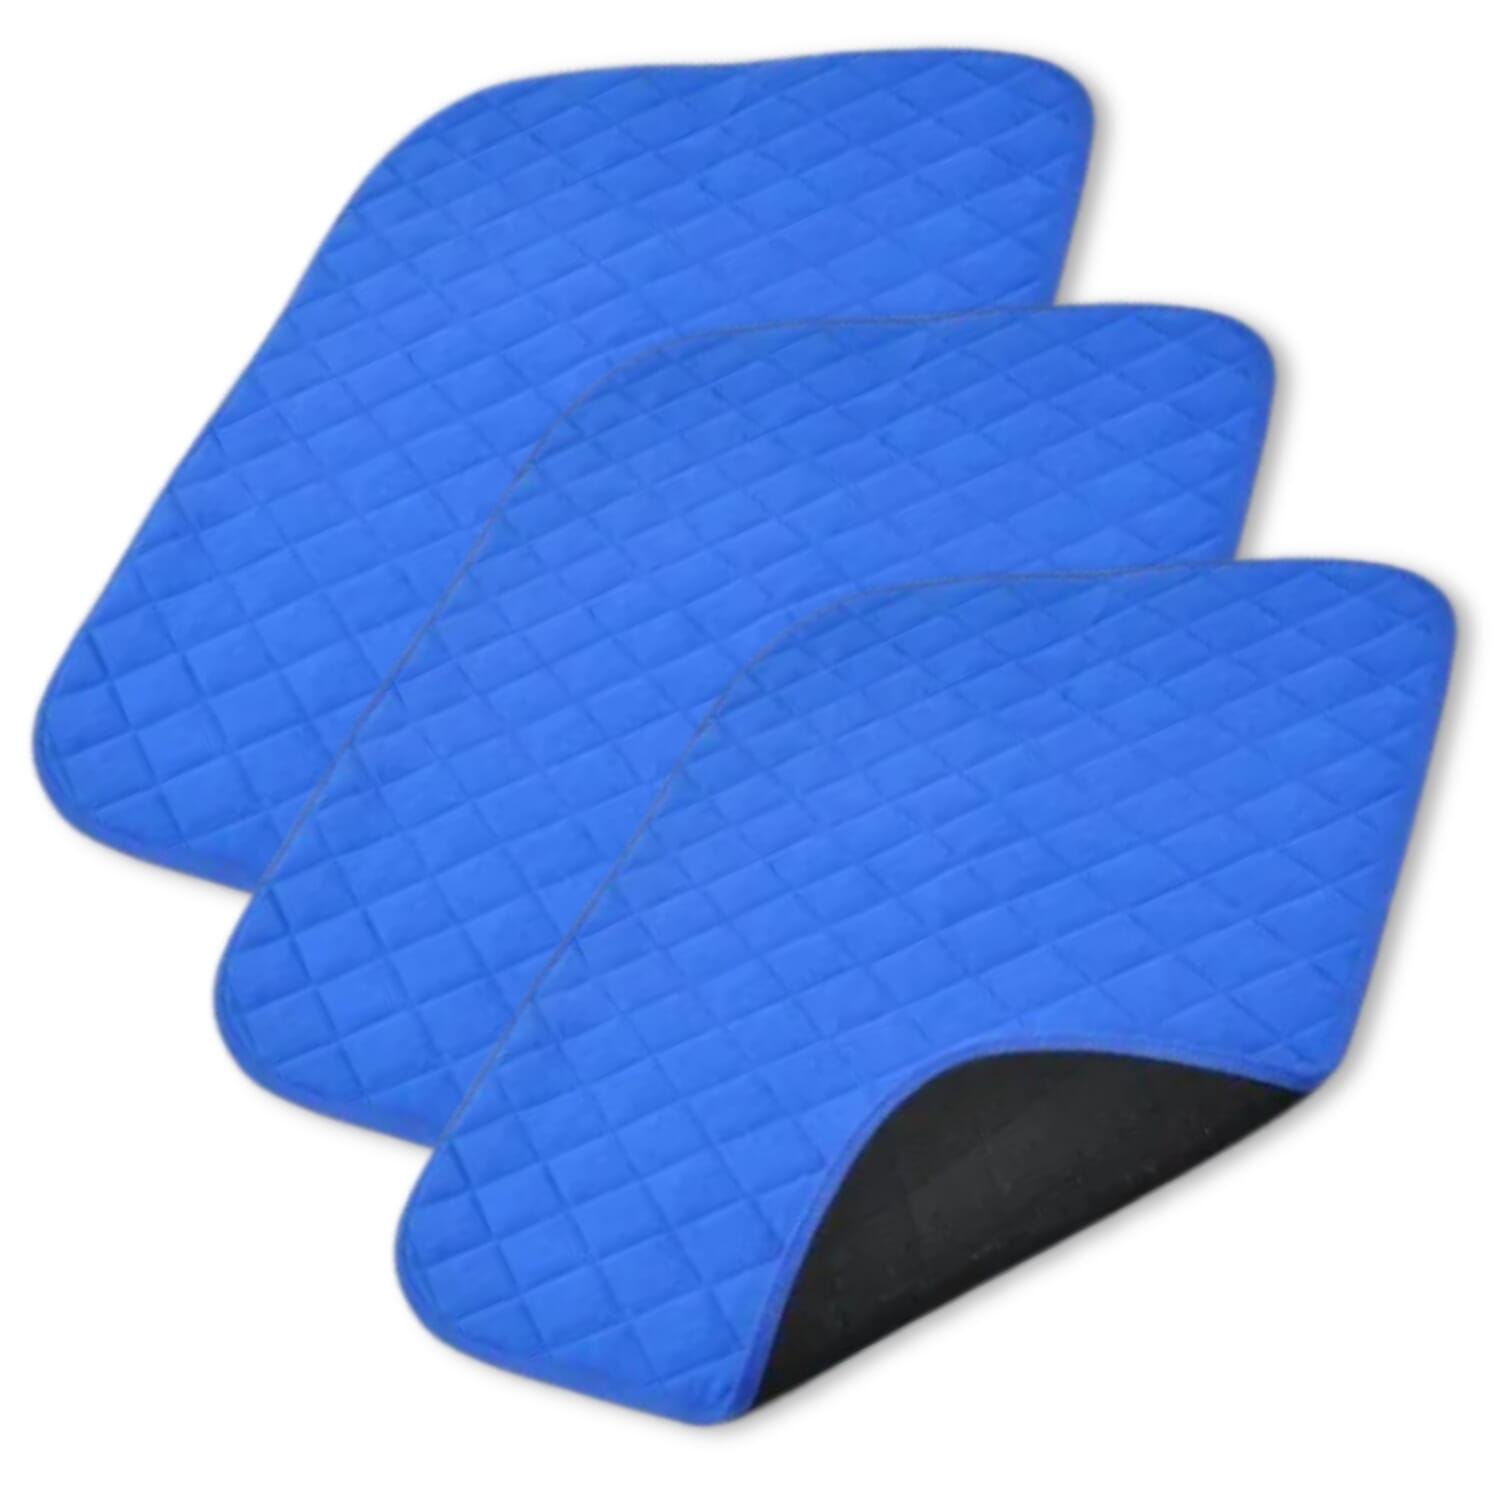 View Vida Washable Chair Pad Blue Pack of 3 information